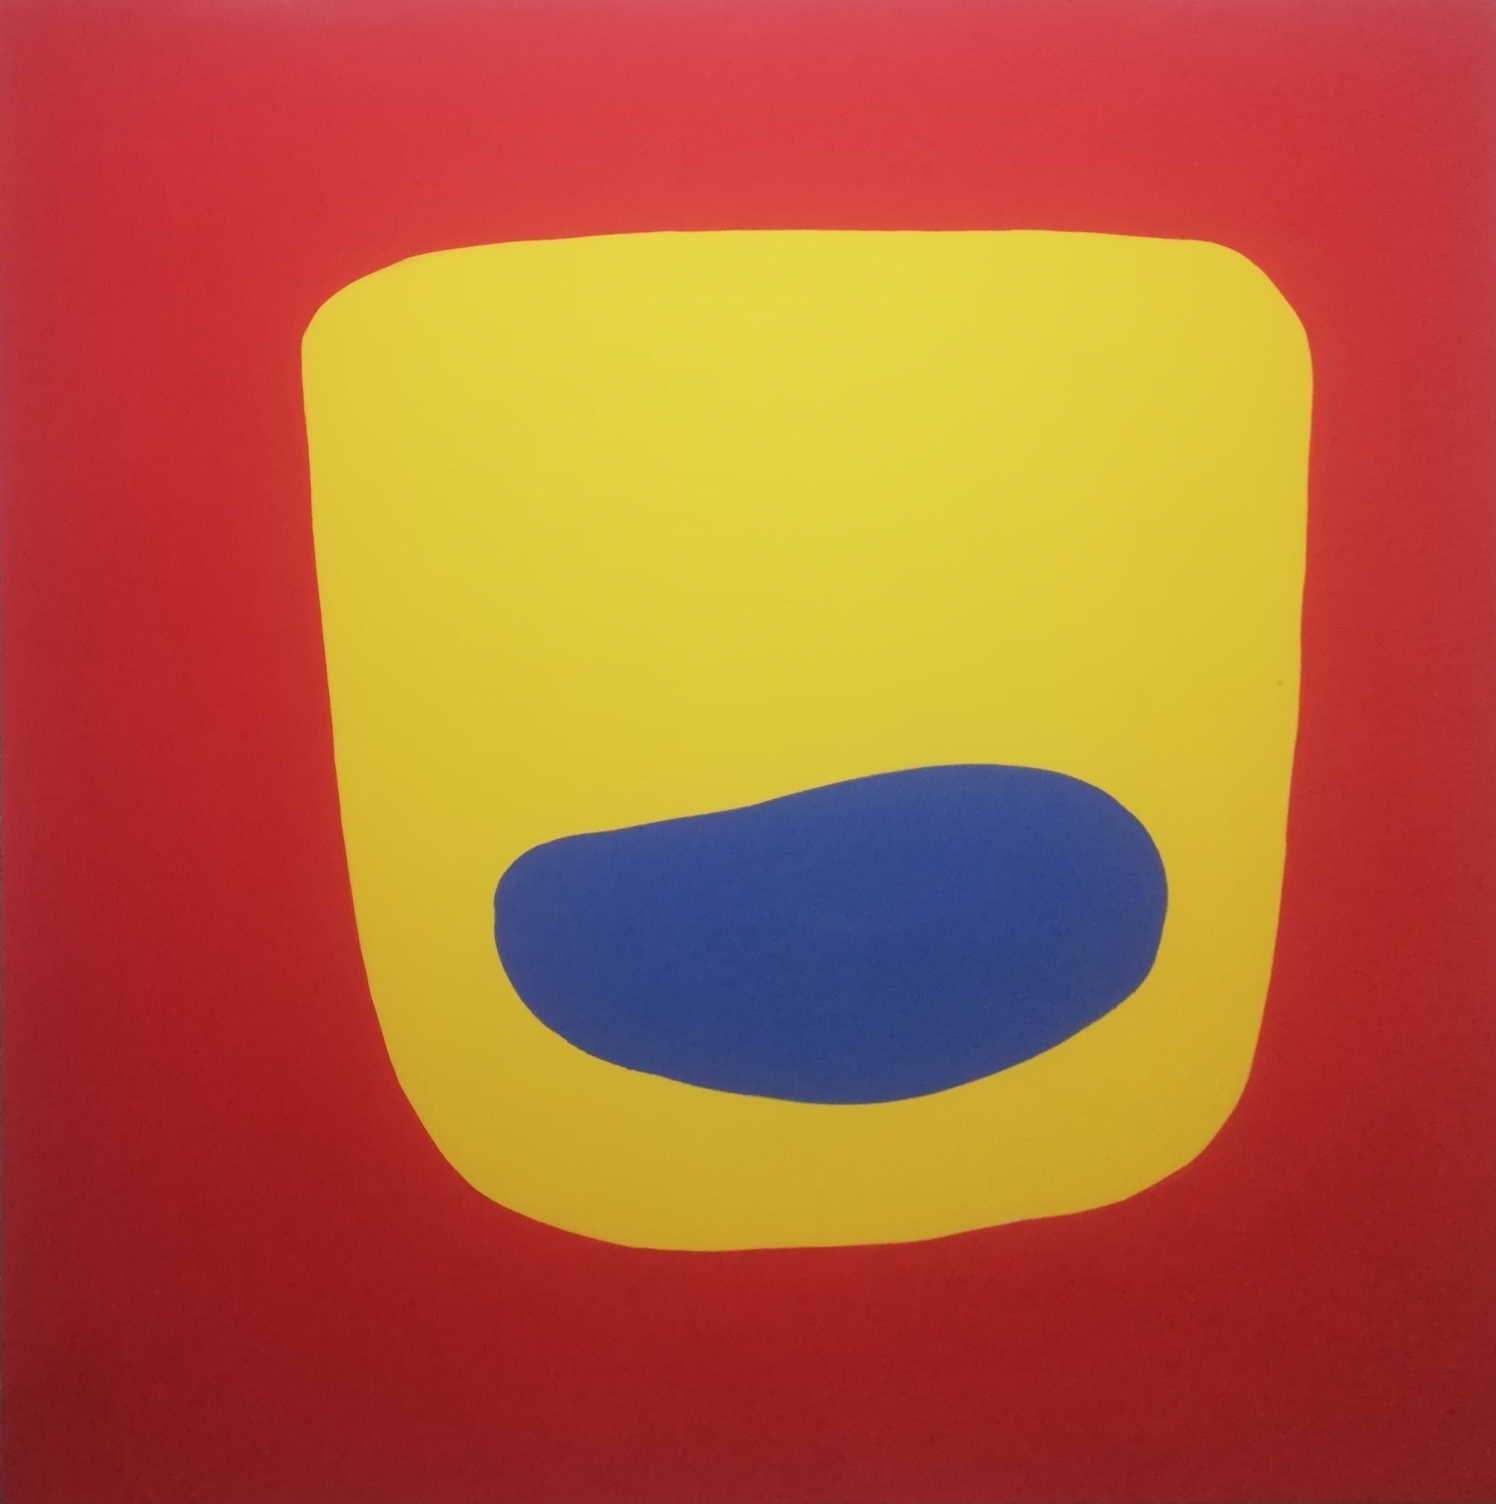 Container - red blue yellow<br>Medium: Emulsion and acrylic on canvas <br> Size: 4'×4'